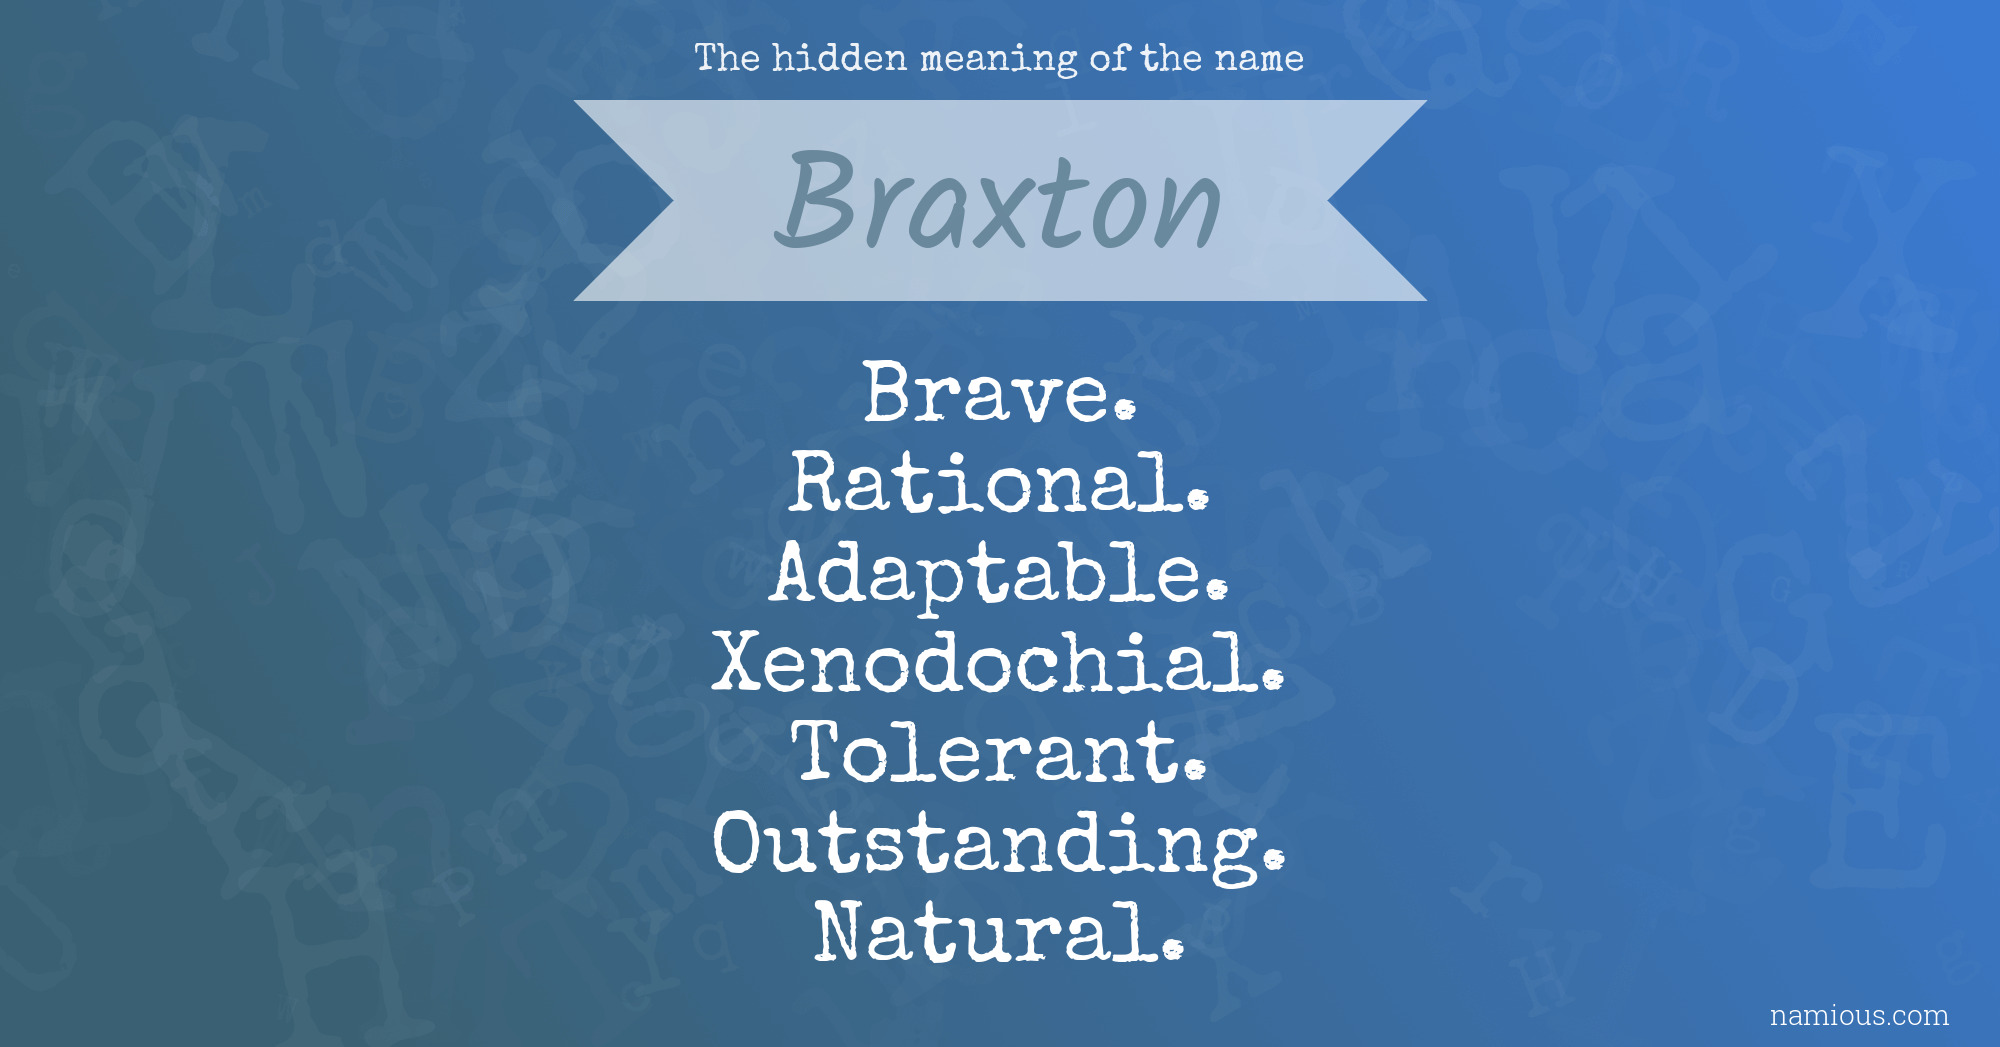 The hidden meaning of the name Braxton